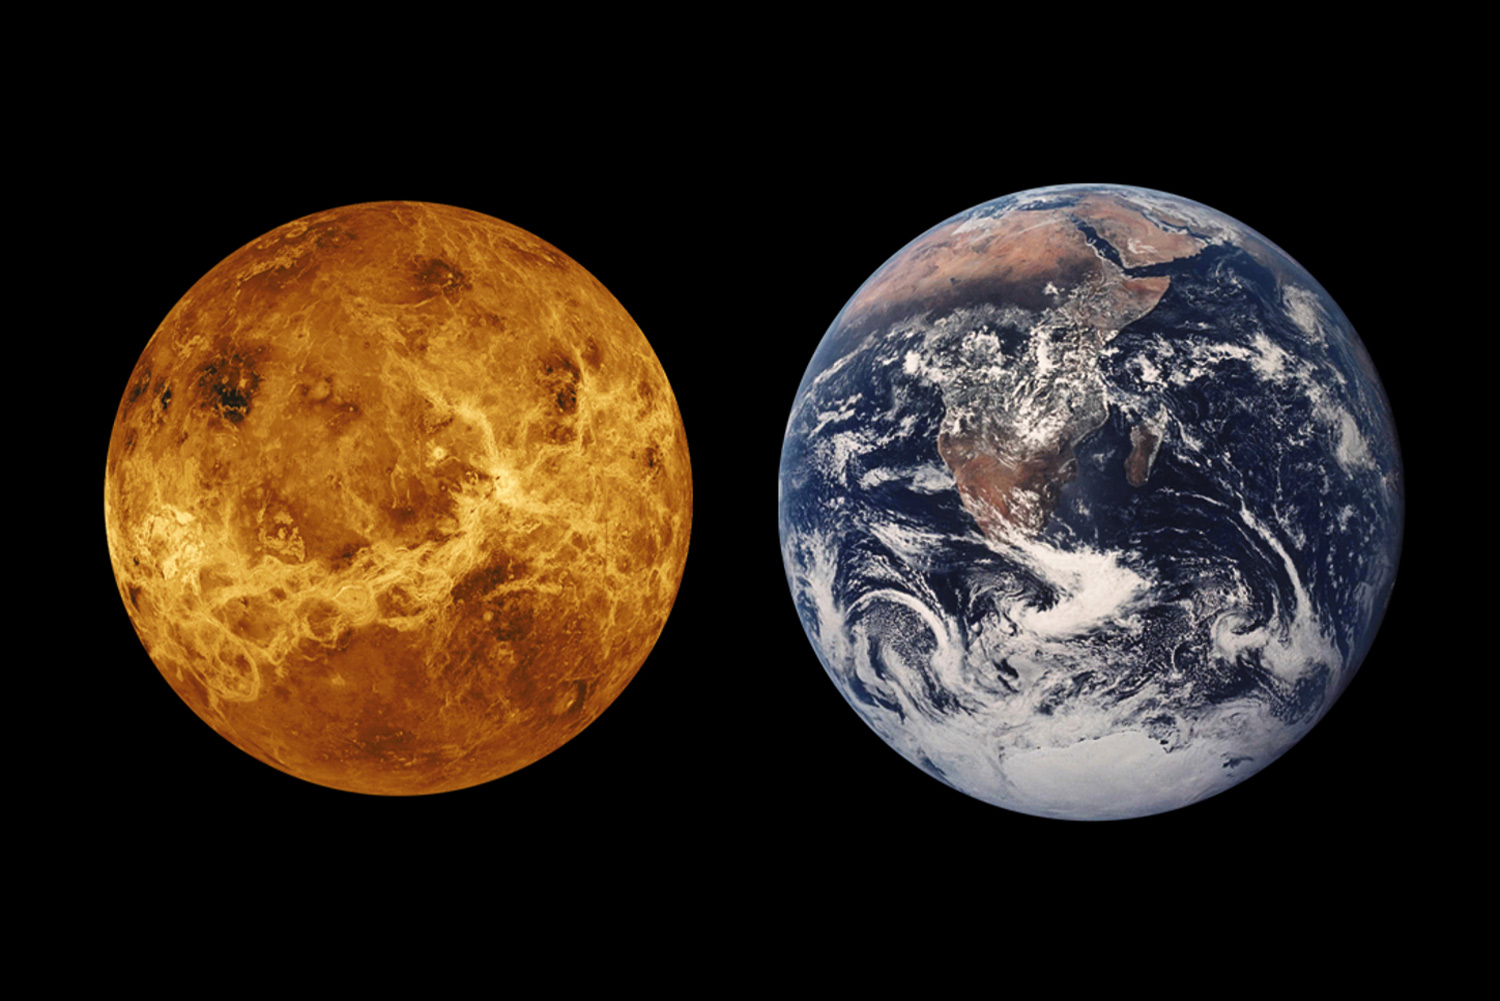 Venus may have been habitable and Earth-like before greenhouse gas took over